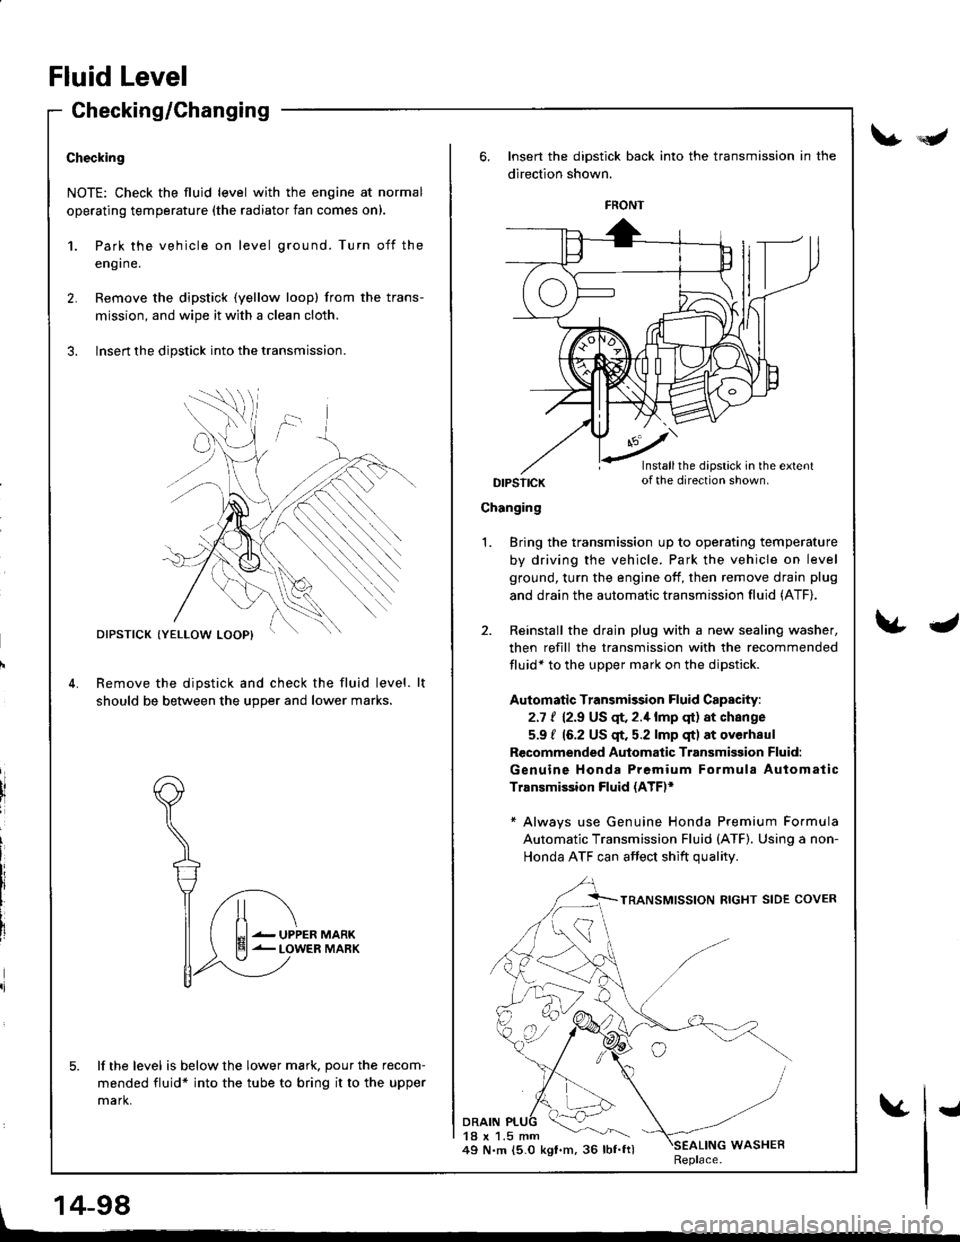 ACURA INTEGRA 1998  Service Repair Manual Checking/Changing
Checking
NOTE: Check the fluid level with the engine at normal
operating temperature (the radiator fan comes on).
1.
2.
Park the vehicle on level ground. Turn off the
eng I ne.
Remov